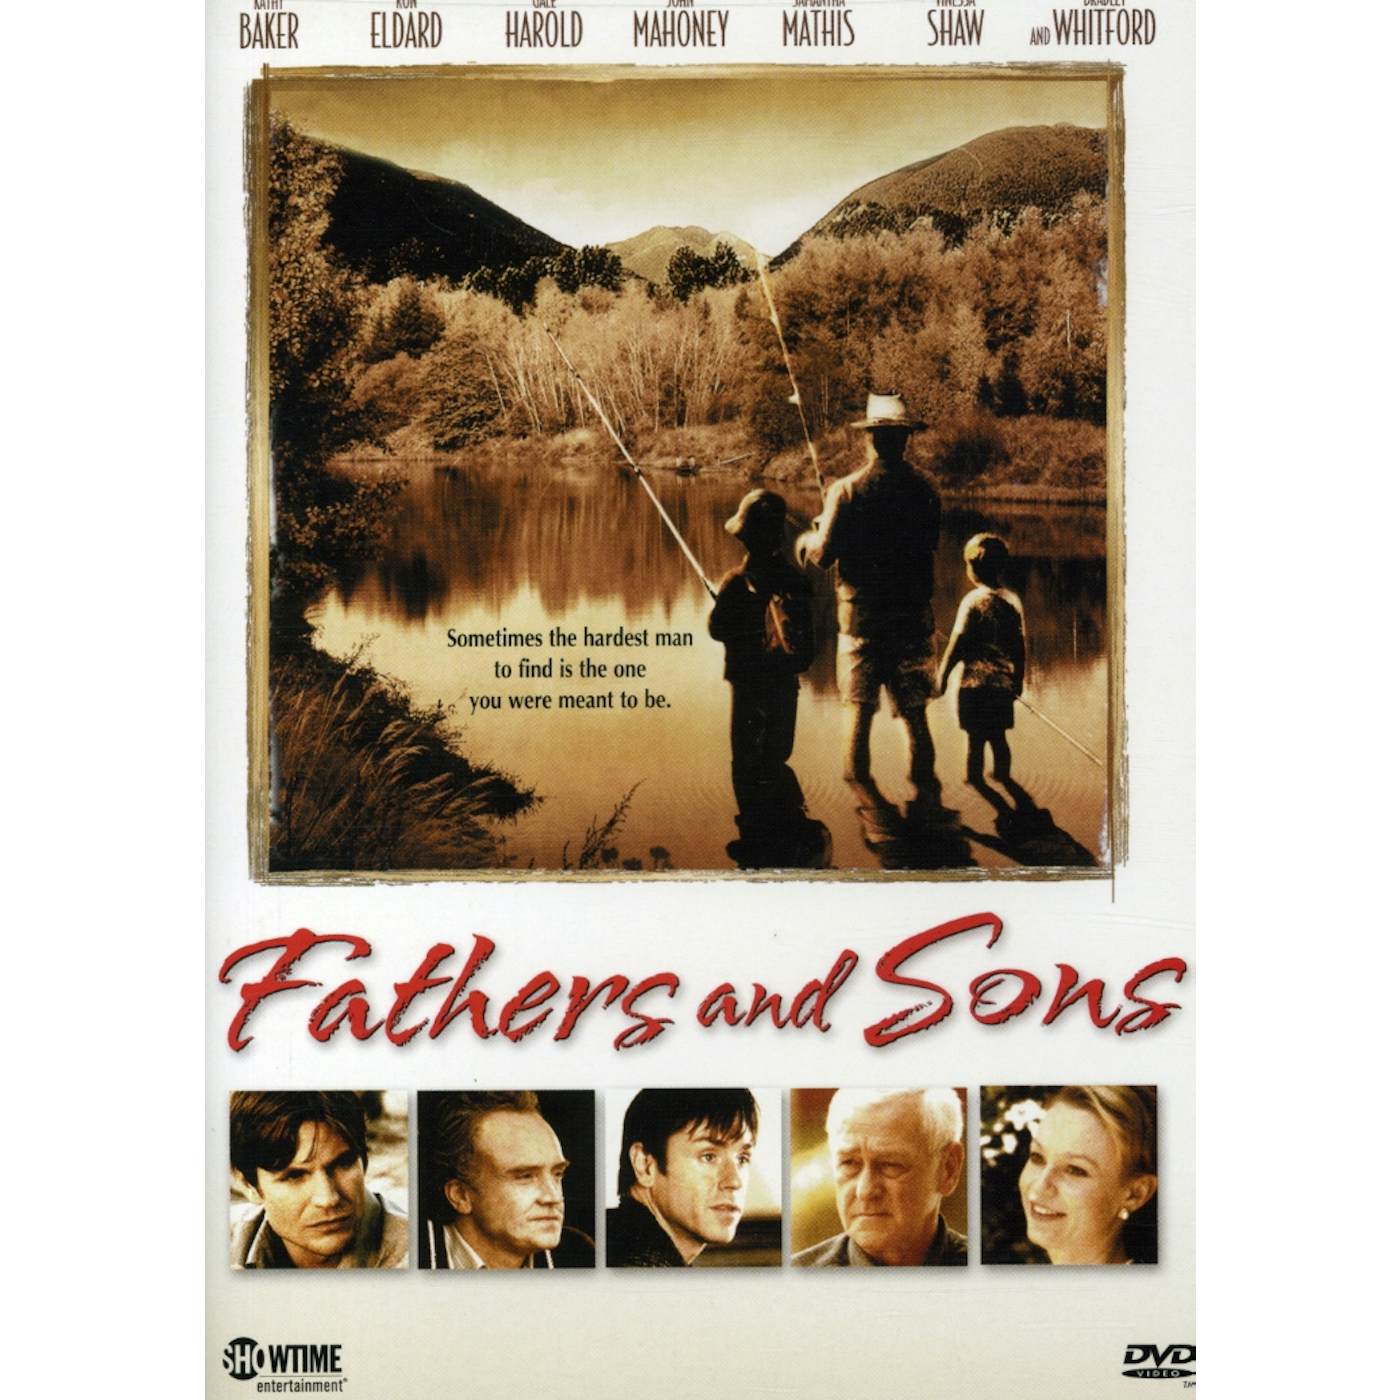 FATHERS & SONS (2004) DVD